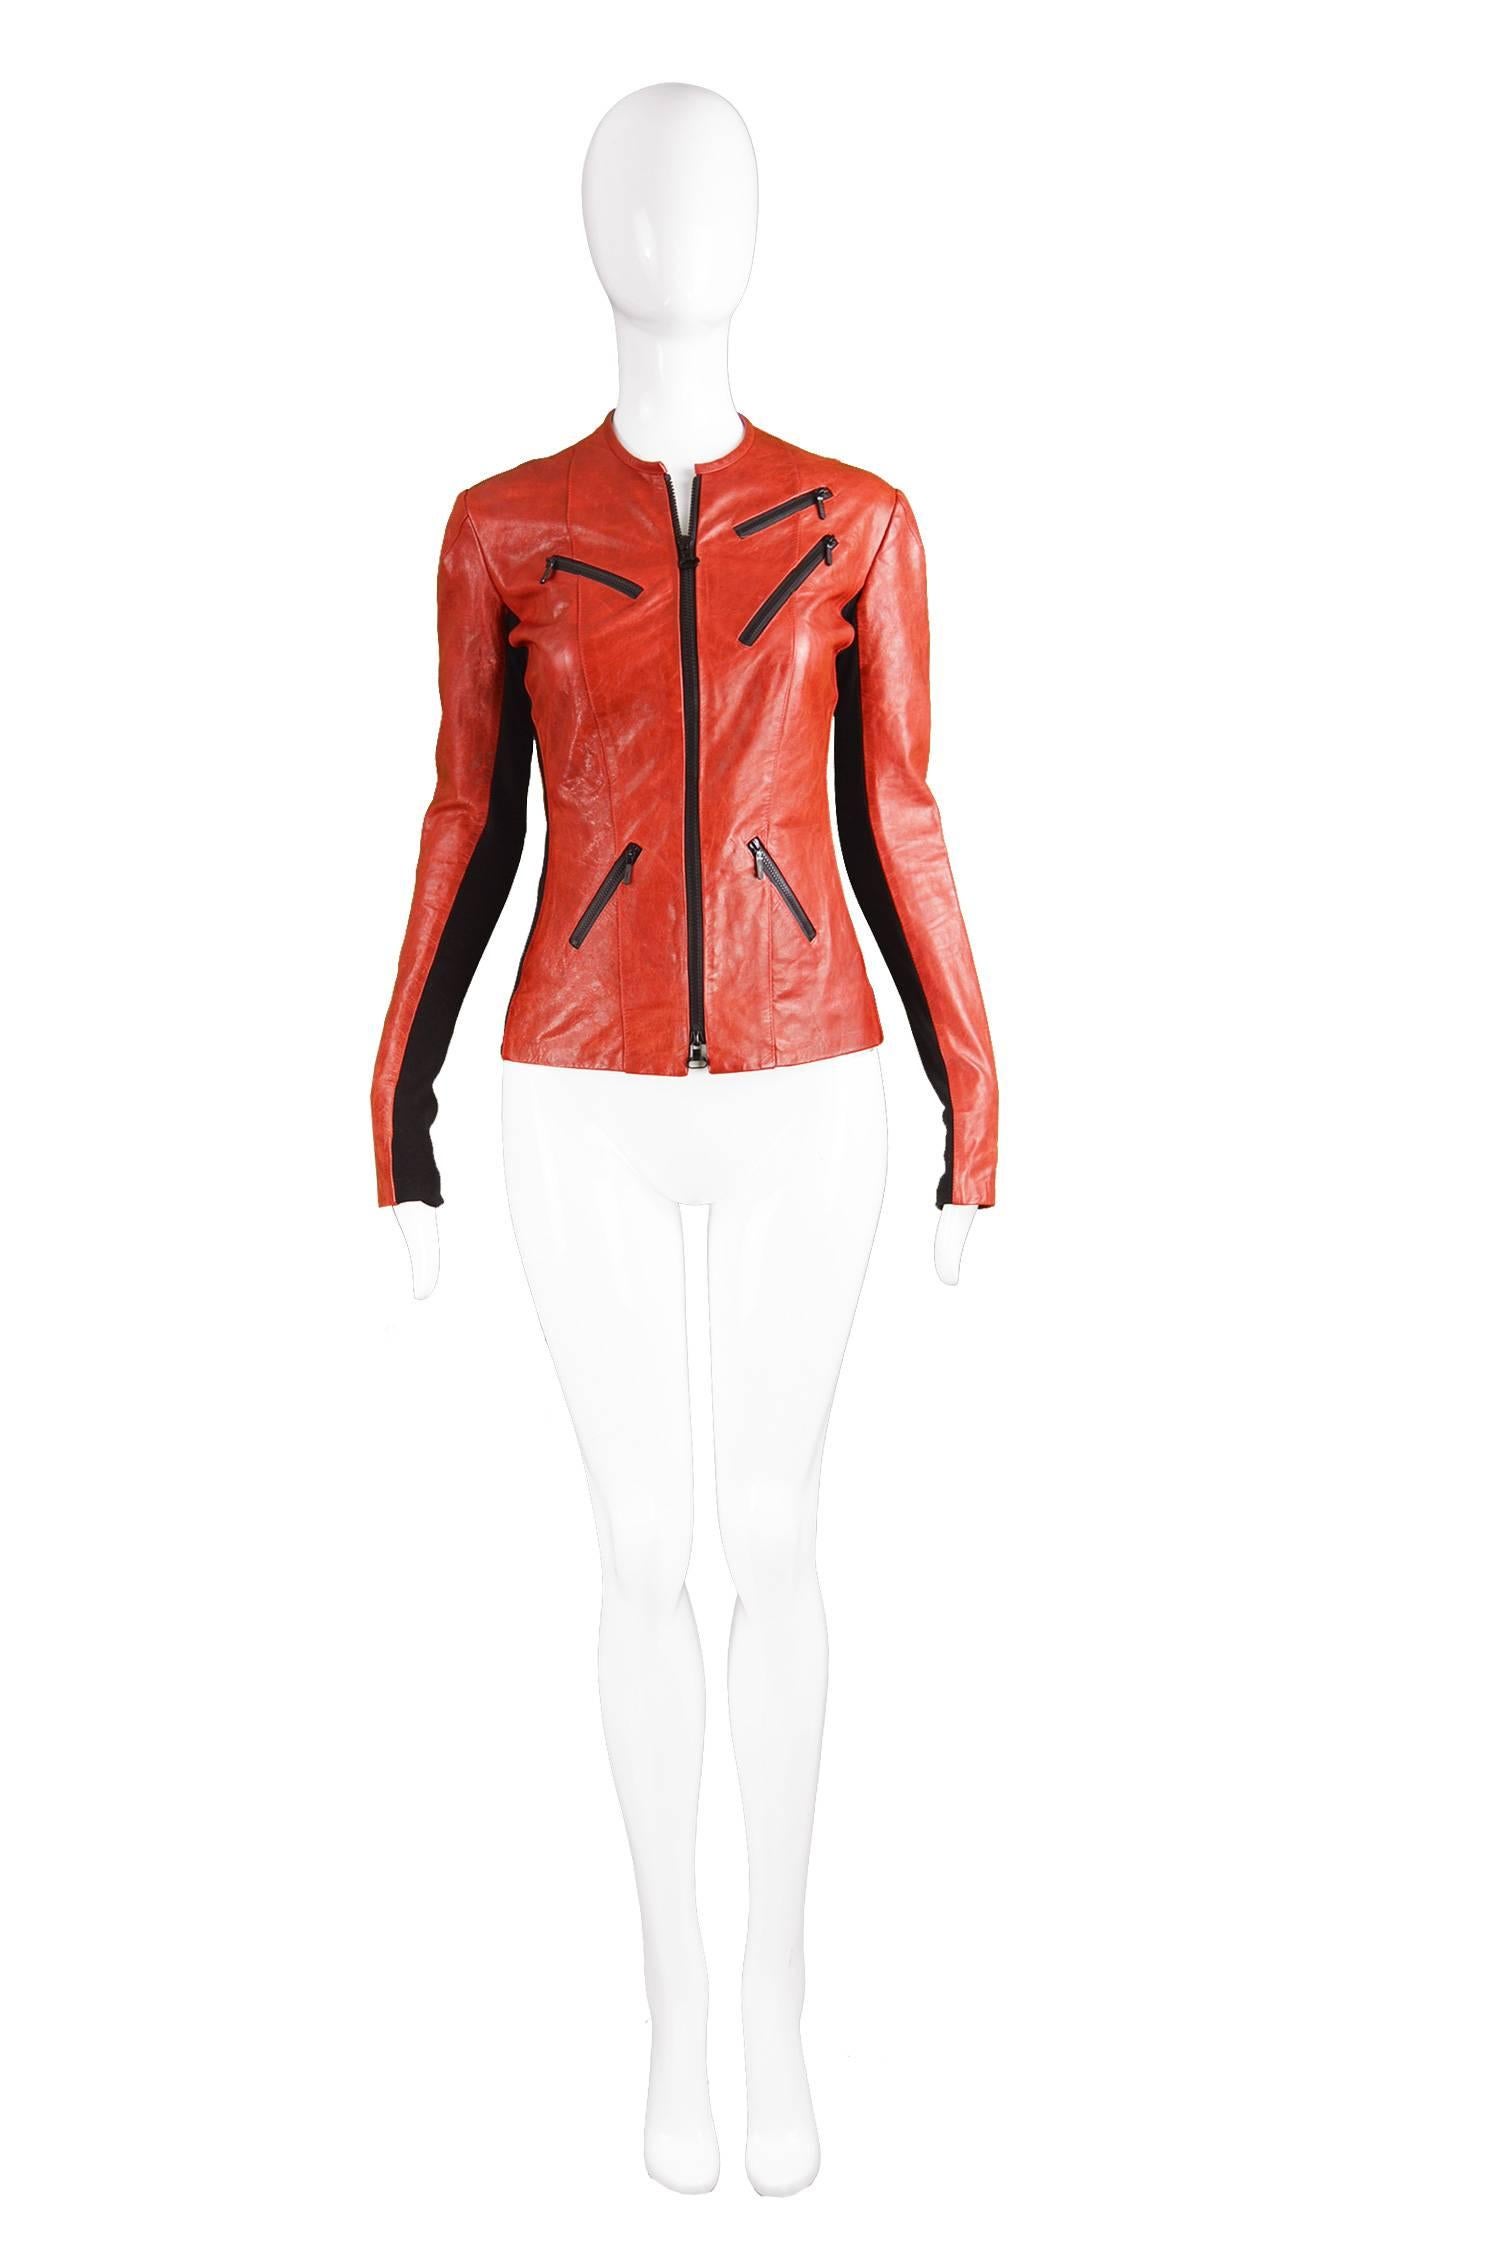 Roland Mouret Red & Black Leather Ladies Marbled Look Slim Fit Biker Jacket

Size: Marked UK 8 which is roughly a US 4/ EU 36. Please check measurements. 
Bust - 34” / 86cm (Please allow a couple of inches room for movement.)
Waist - 27” /